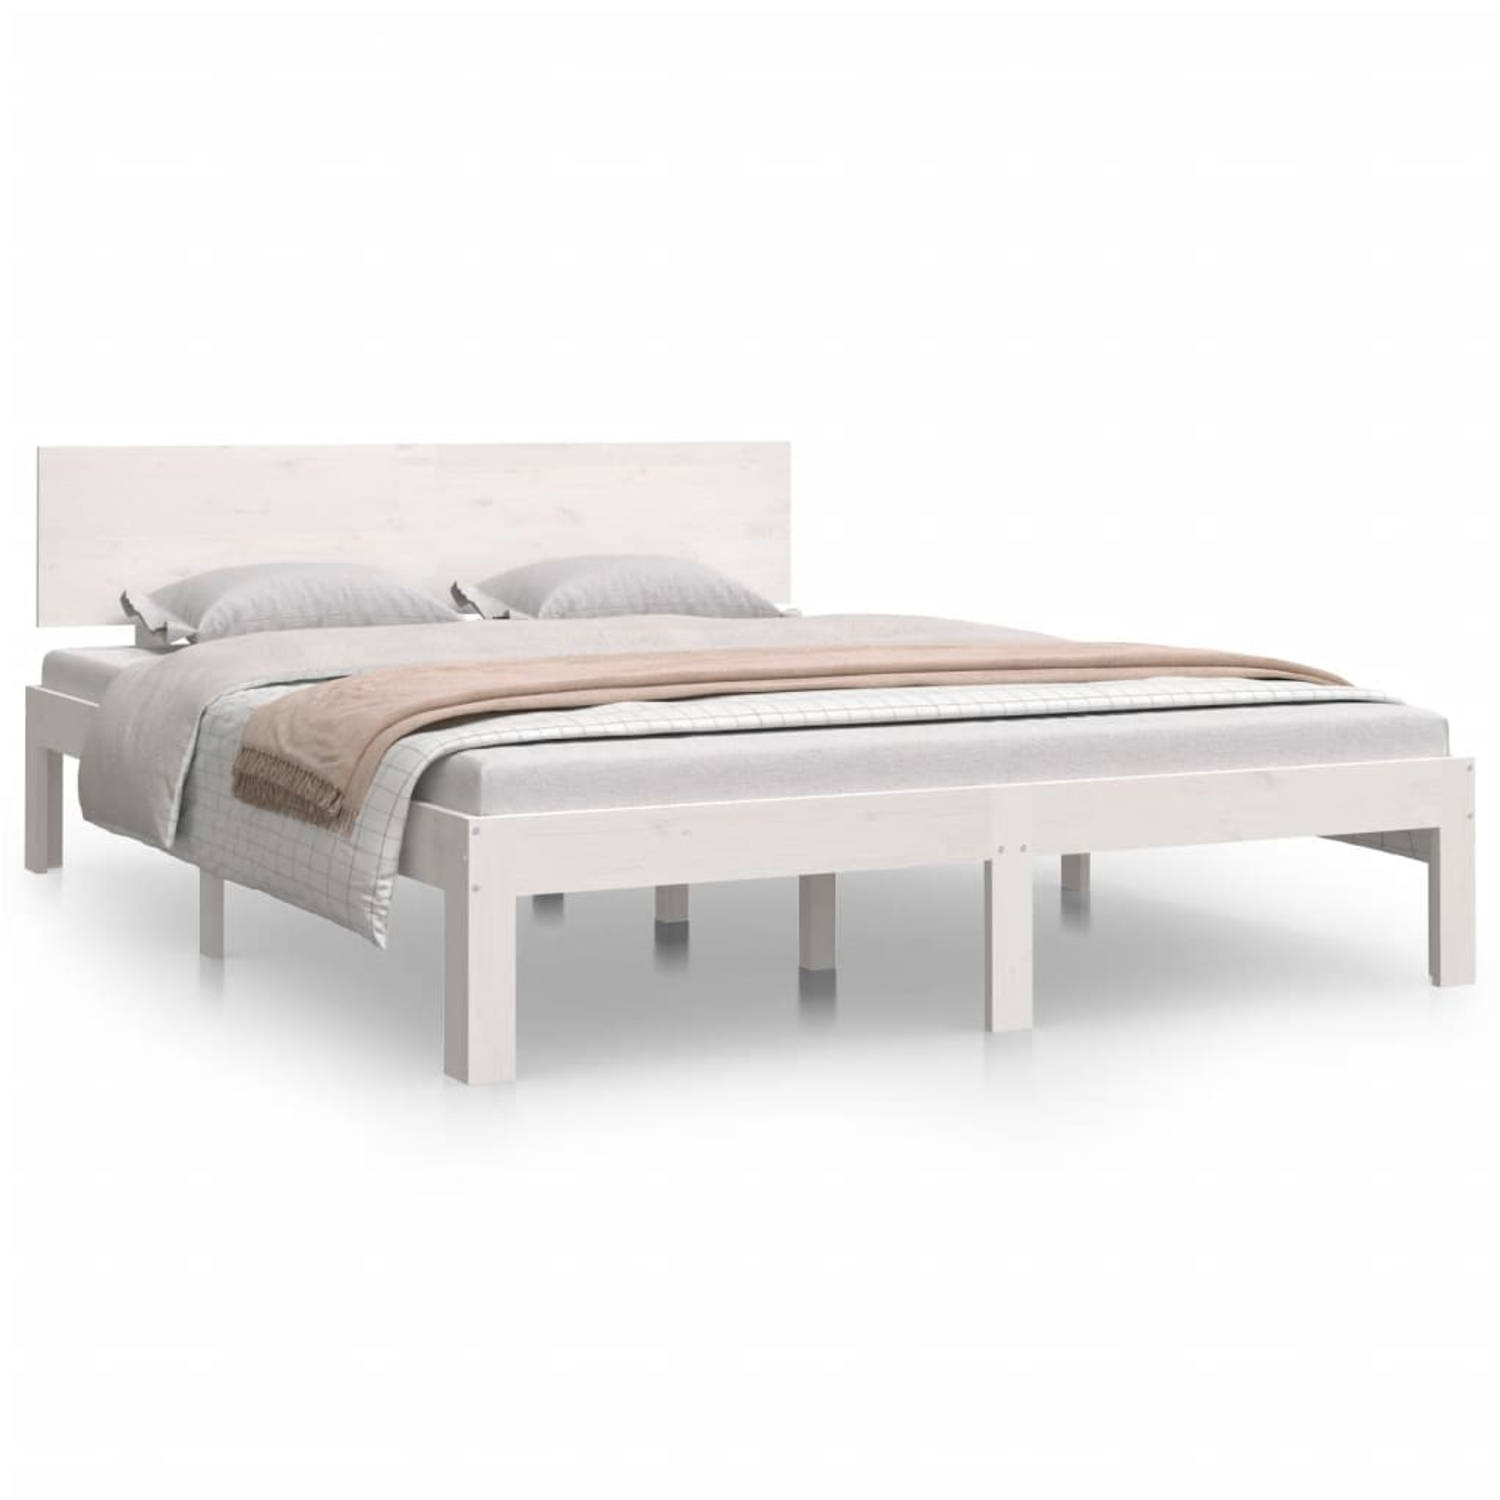 The Living Store Bedframe - Massief Grenenhout - 195.5 x 143.5 x 69.5 cm - Wit